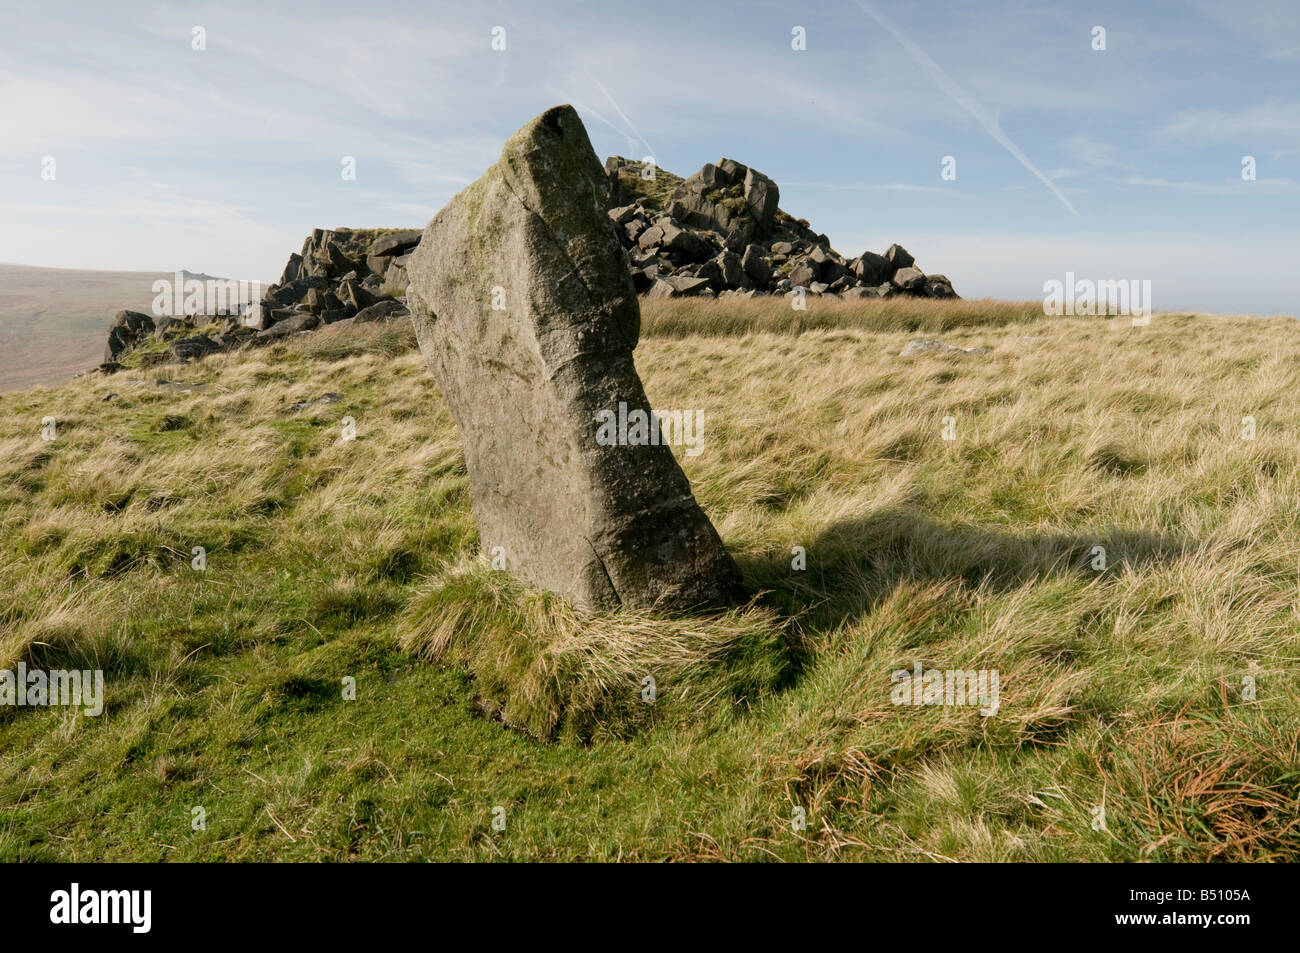 Standing stone at Carn Menyn Carn Meini rocky bluestone outcrop Pembrokeshire south west wales autumn afternoon, UK Stock Photo